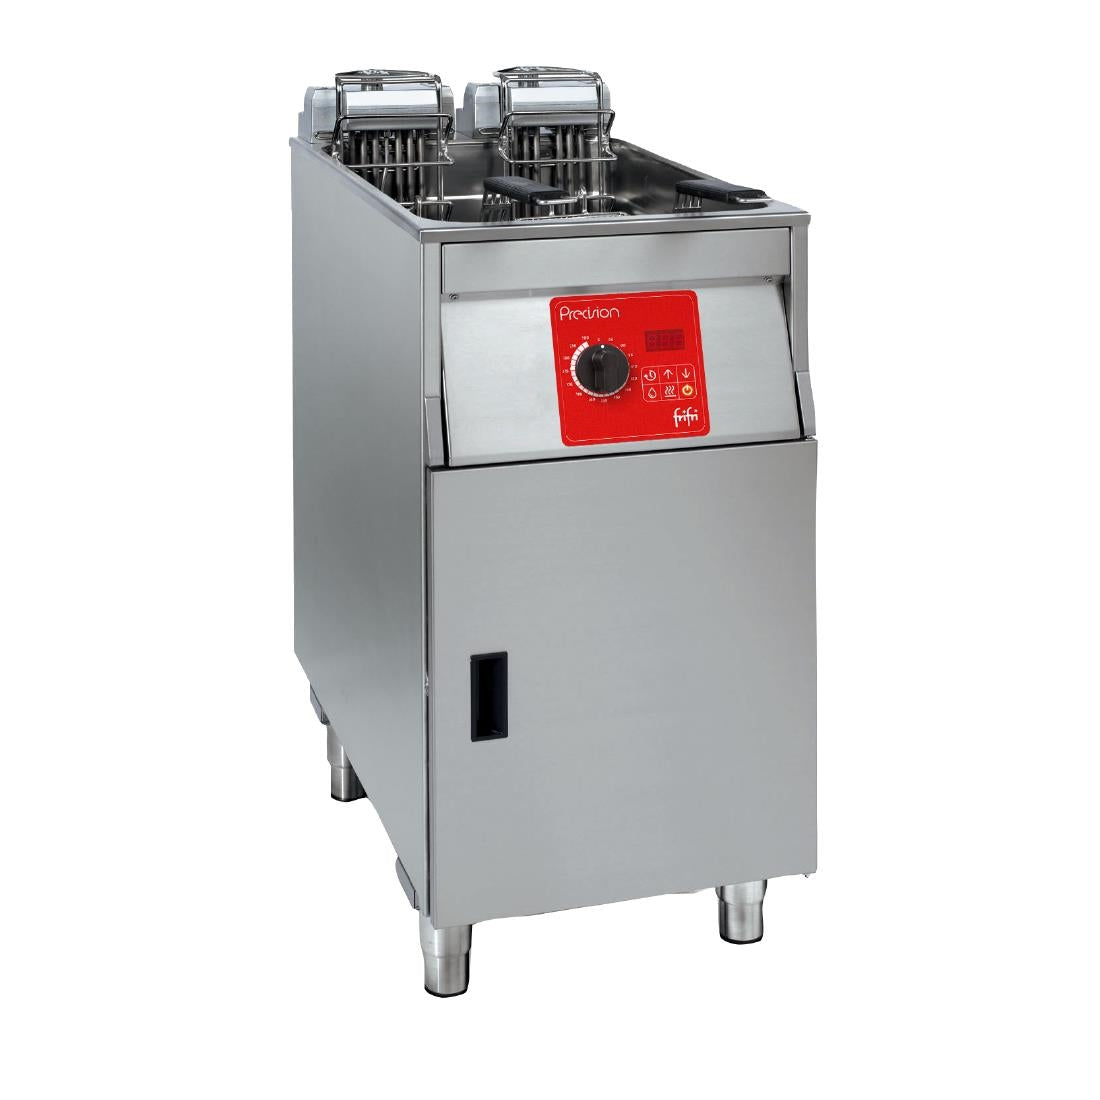 CX901 FriFri Precision 412 Electric Free Standing Single Tank Filtration Fryer PL412M31G0 JD Catering Equipment Solutions Ltd